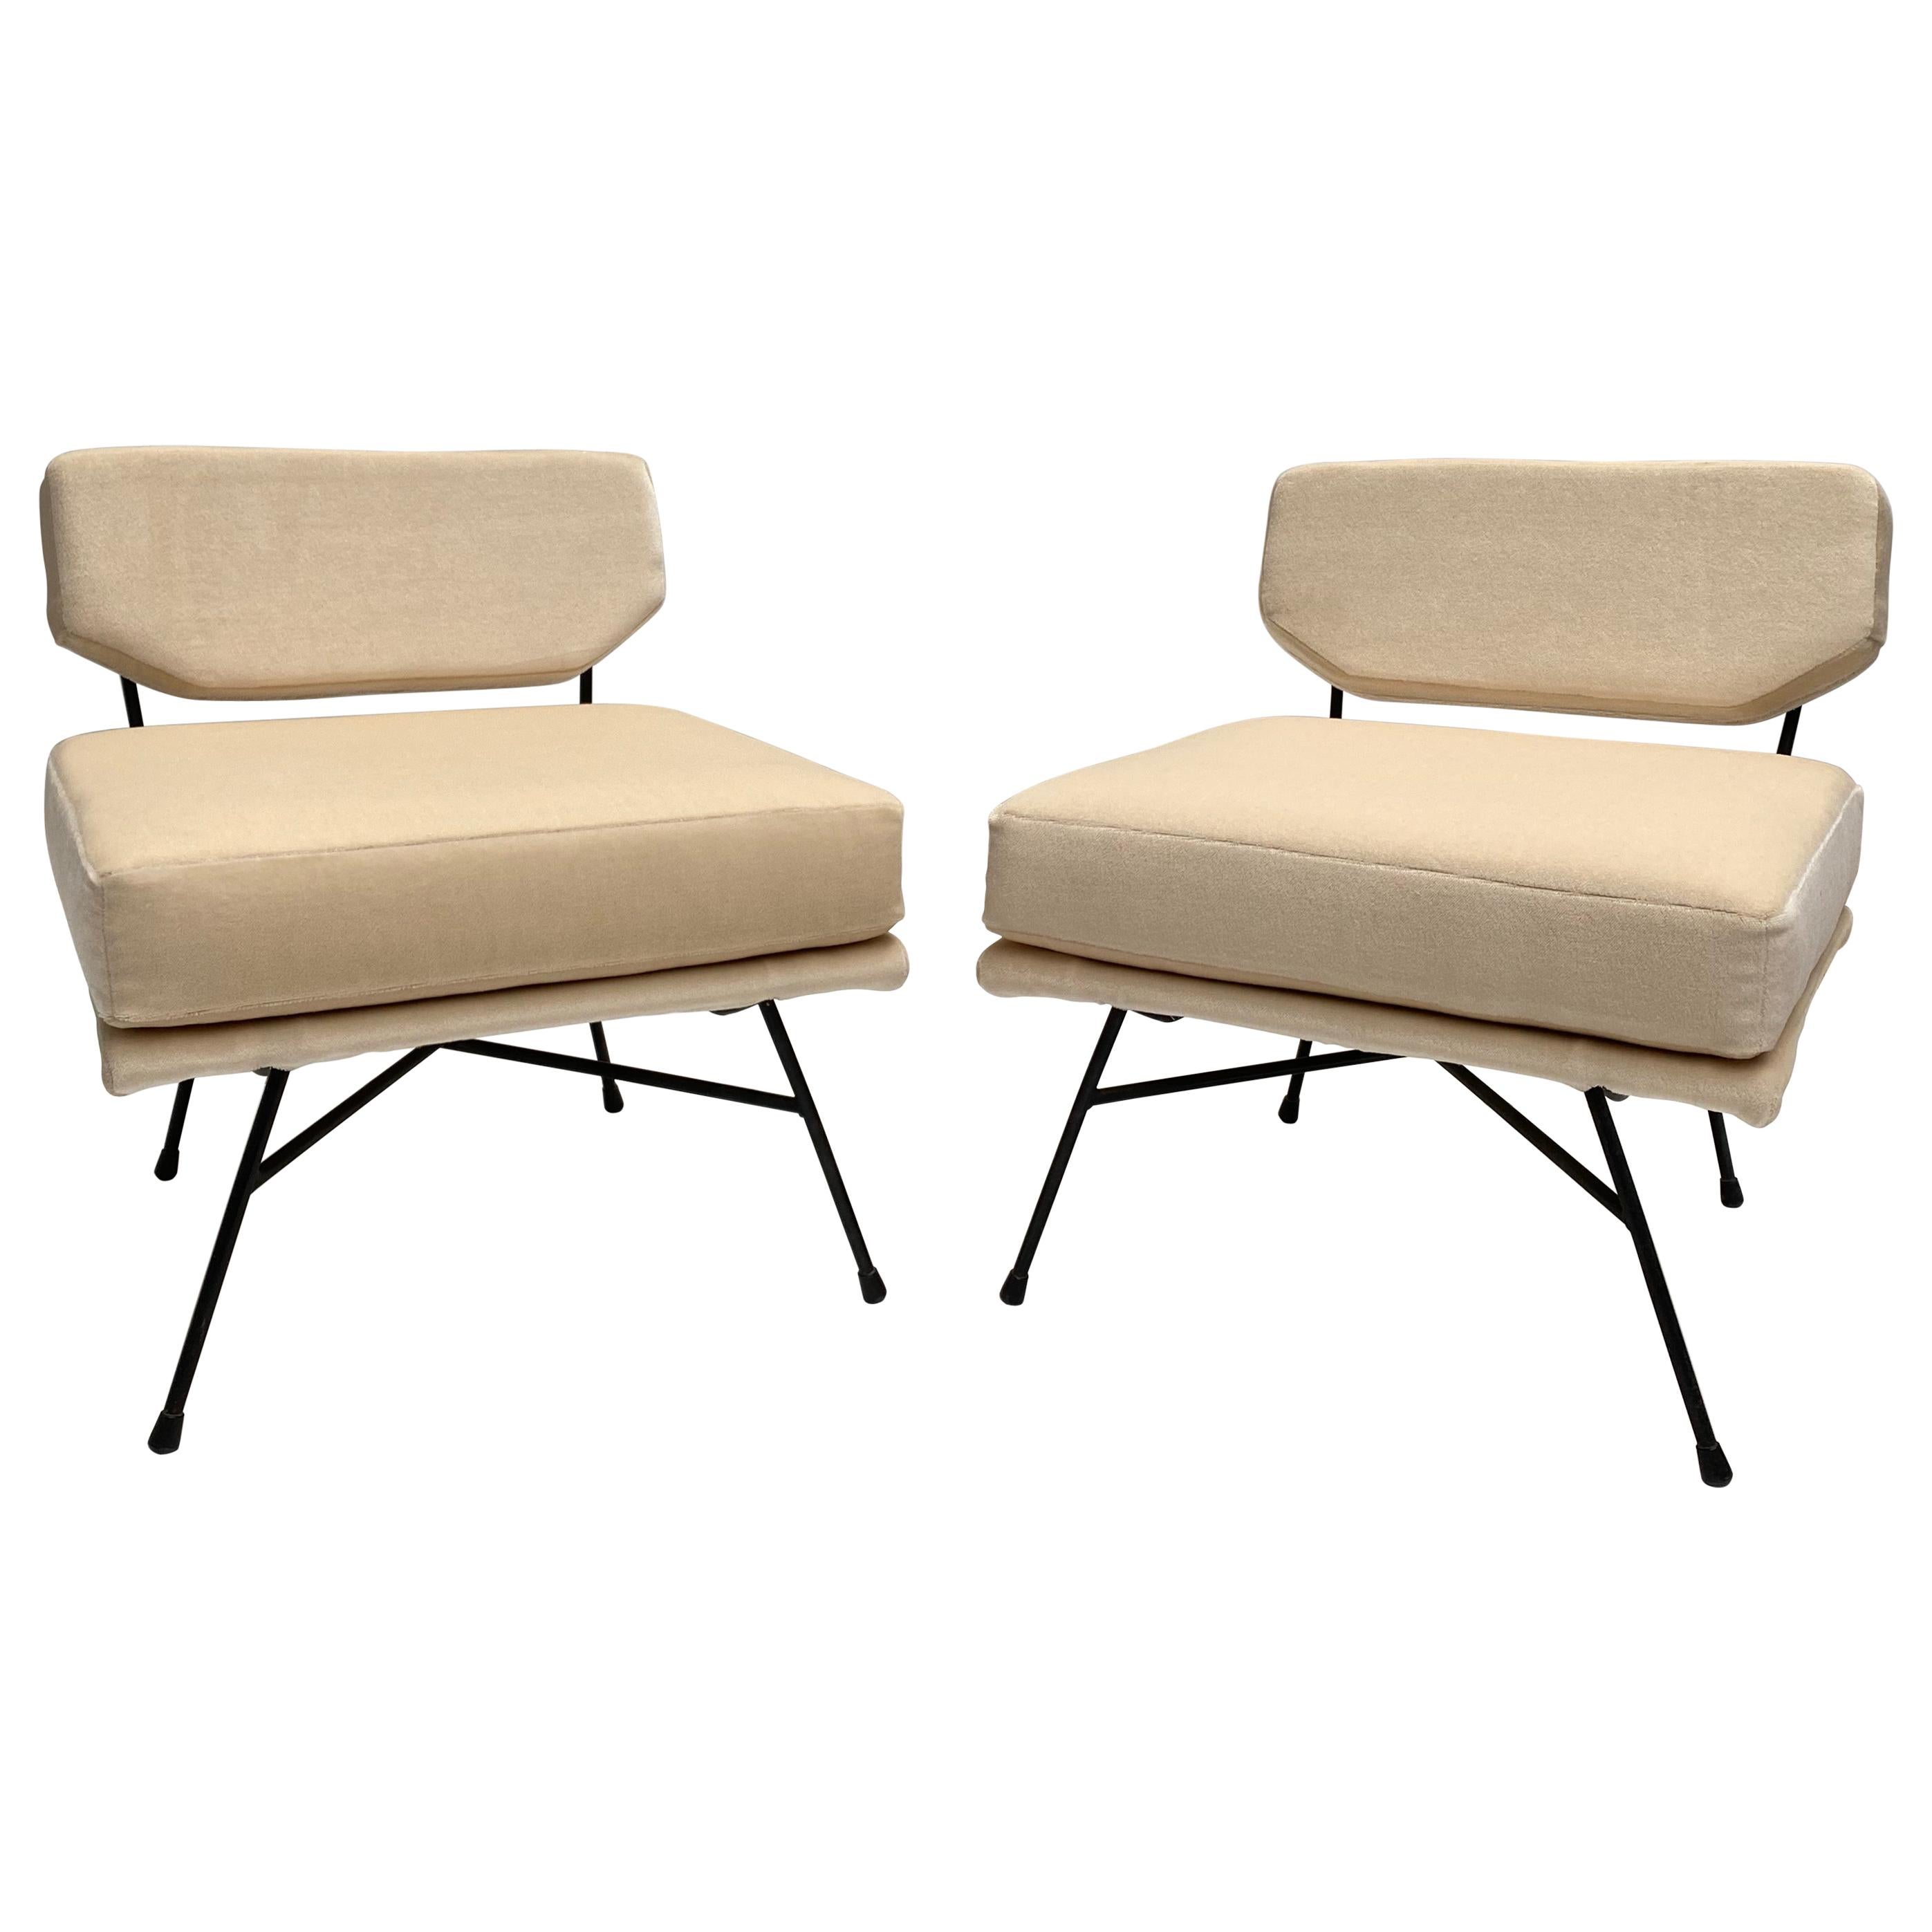 Pair of 'Elettra' Lounge Chairs by BBPR, Arflex, Italy 1953, Compasso D'Oro 1954